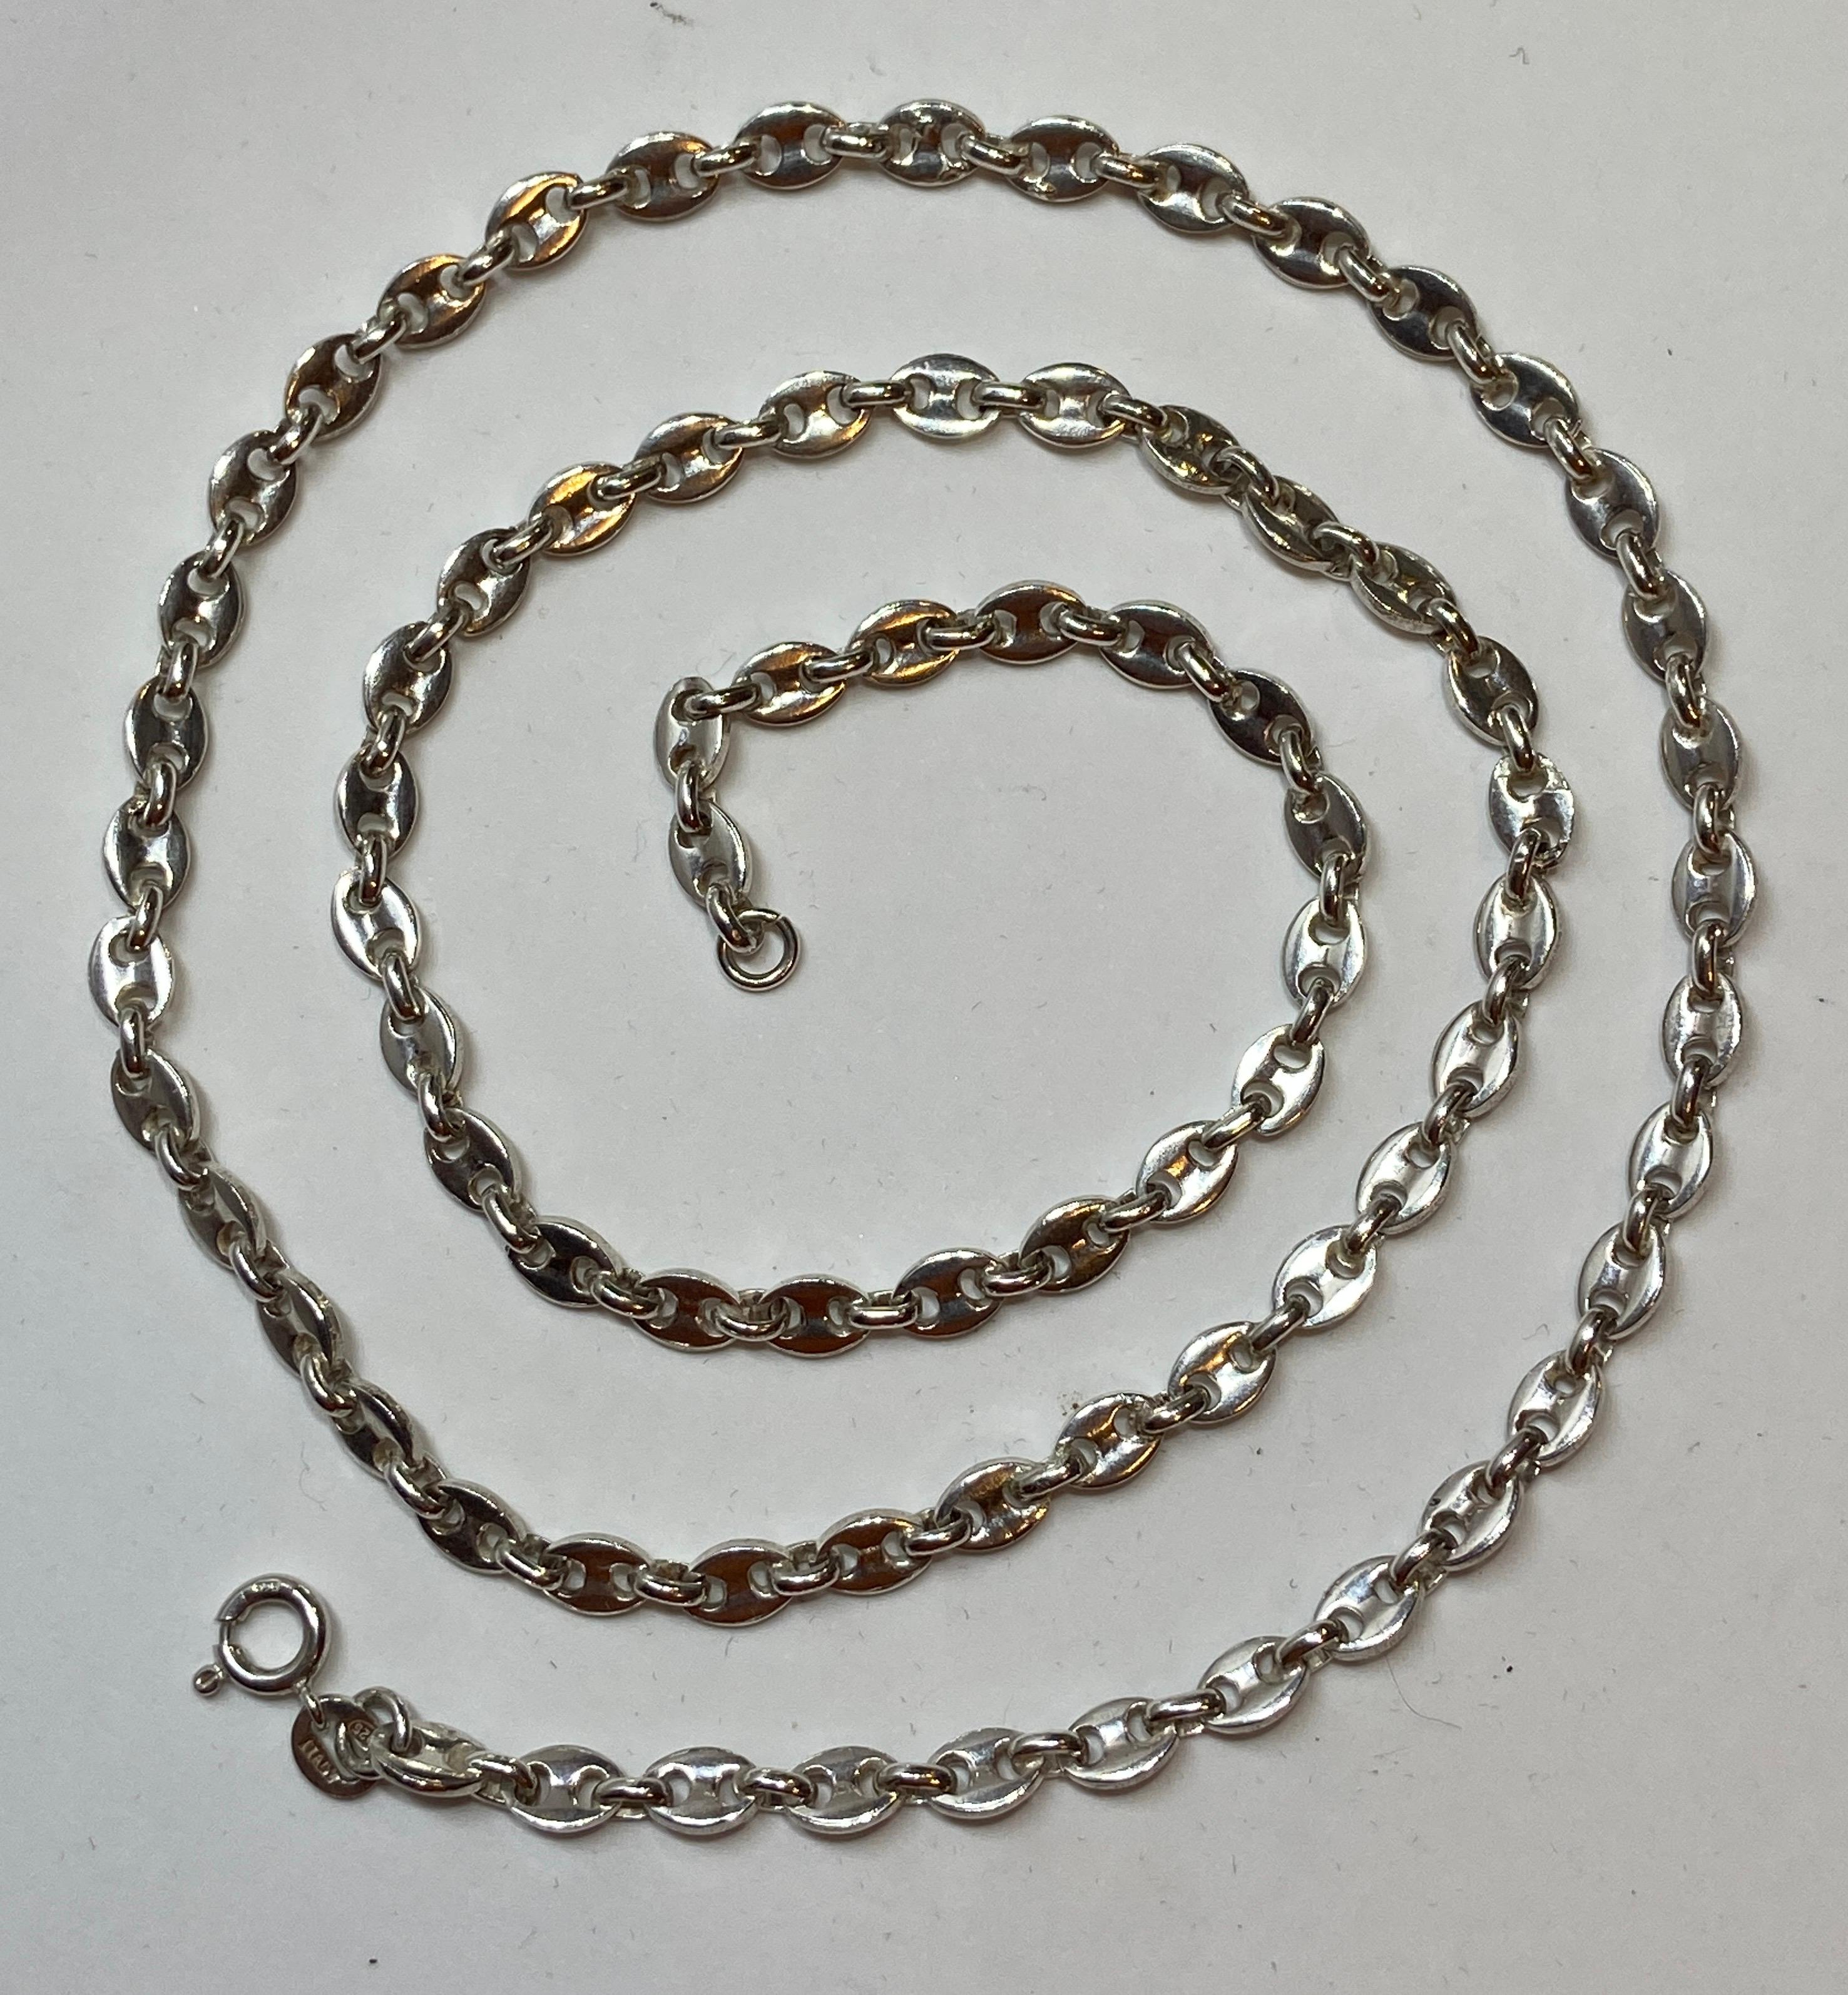      This wonderfully elegant Italian sterling silver Gucci-styled heavy chain-link necklace measures 26 inches in total length. Marked: Italy 925. Made in Italy.